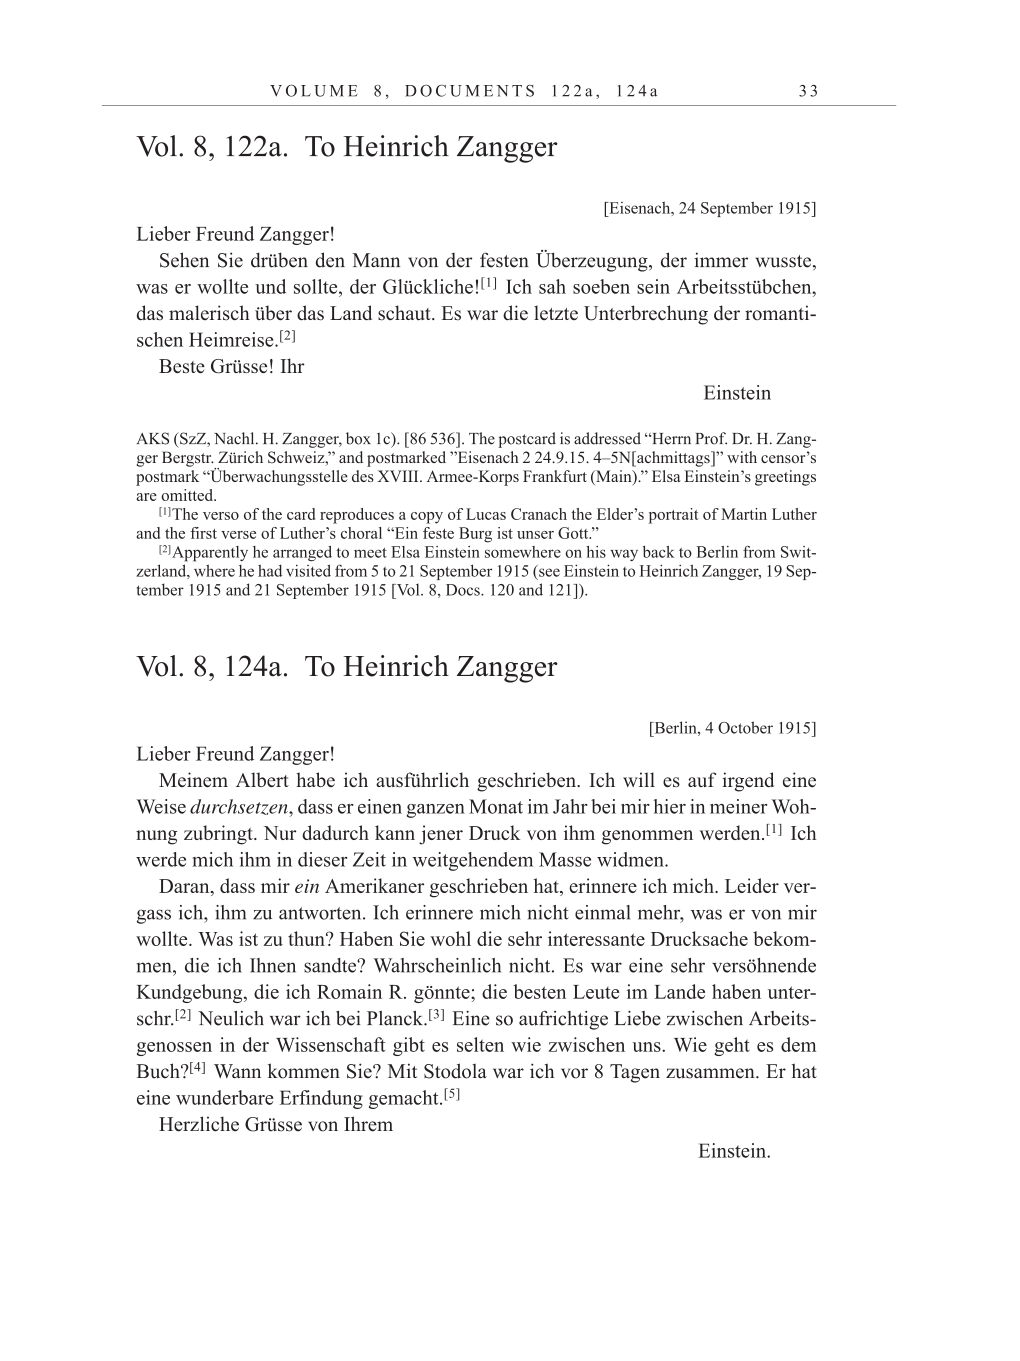 Volume 10: The Berlin Years: Correspondence May-December 1920 / Supplementary Correspondence 1909-1920 page 33